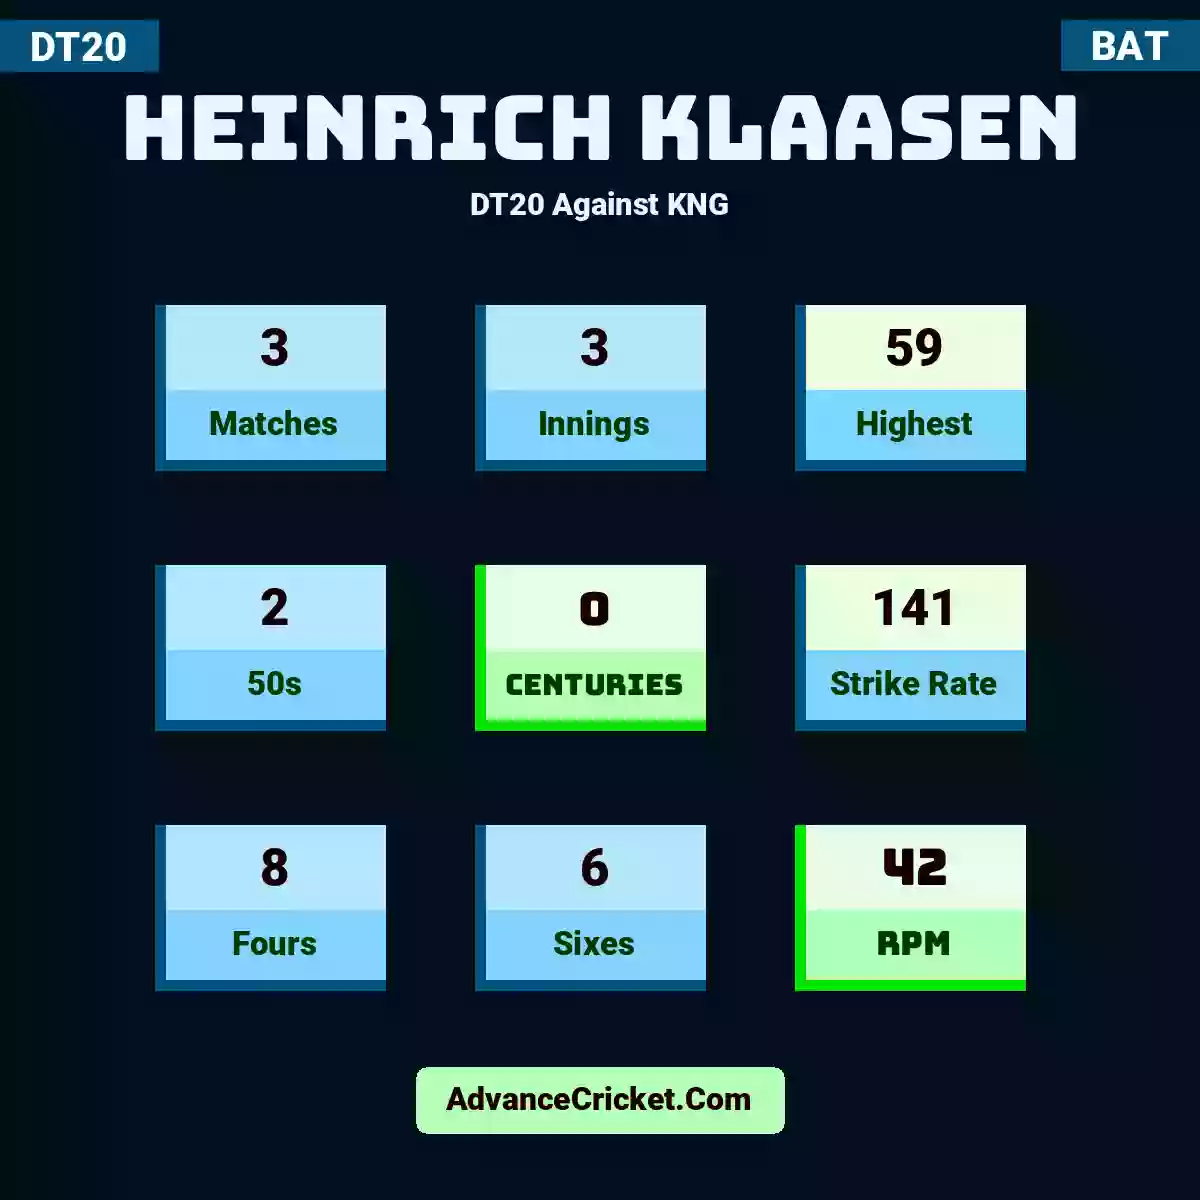 Heinrich Klaasen DT20  Against KNG, Heinrich Klaasen played 3 matches, scored 59 runs as highest, 2 half-centuries, and 0 centuries, with a strike rate of 141. H.Klaasen hit 8 fours and 6 sixes, with an RPM of 42.